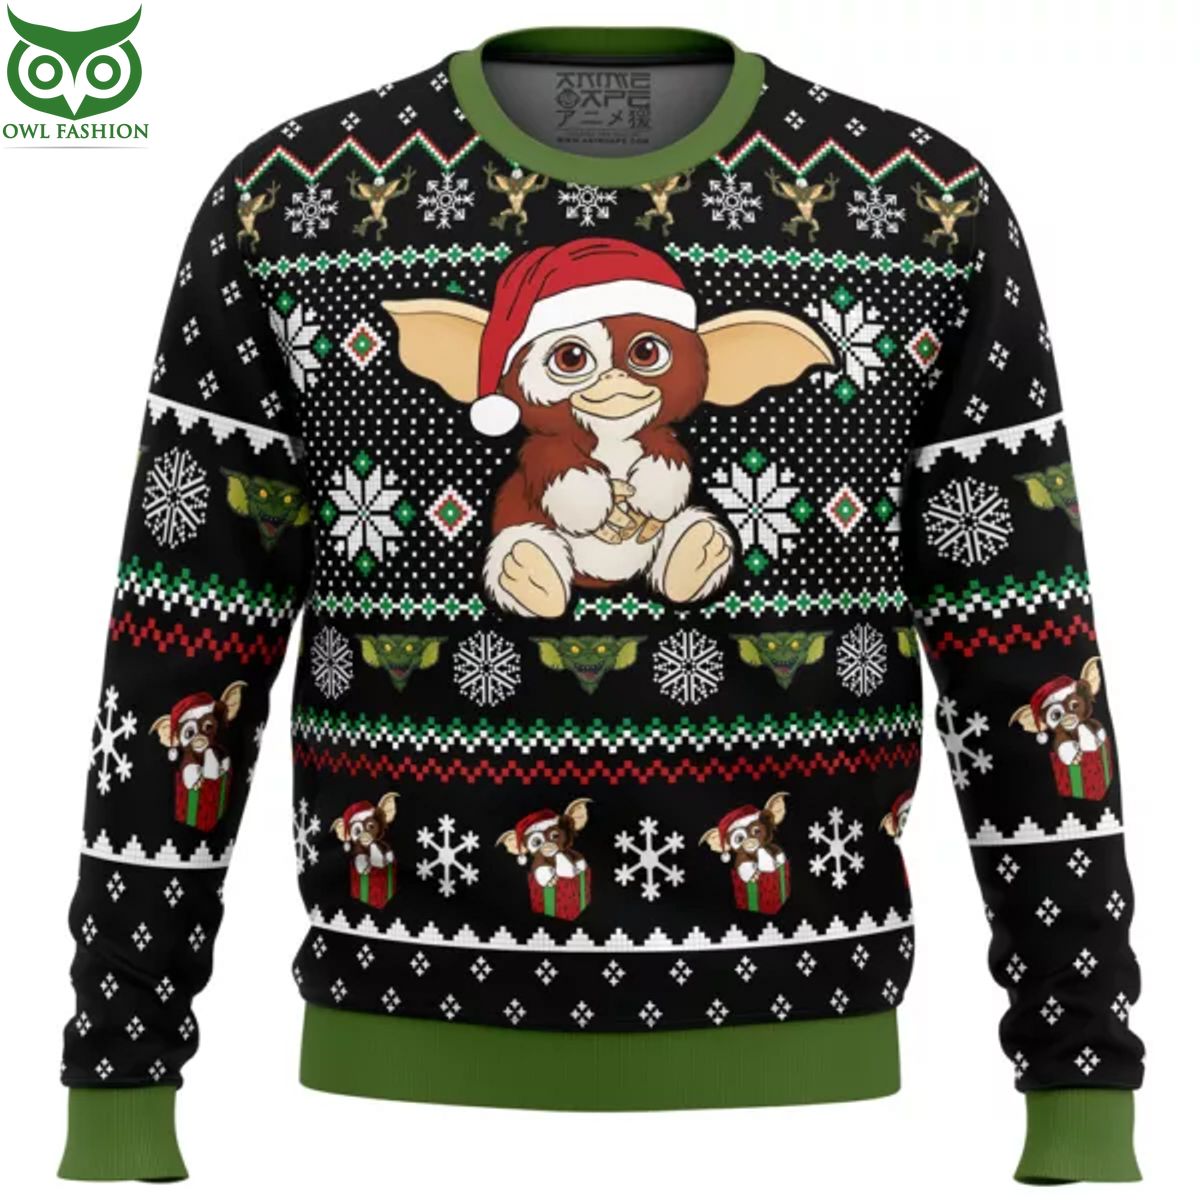 cute character christmas ugly sweater 2 V4xis.jpg